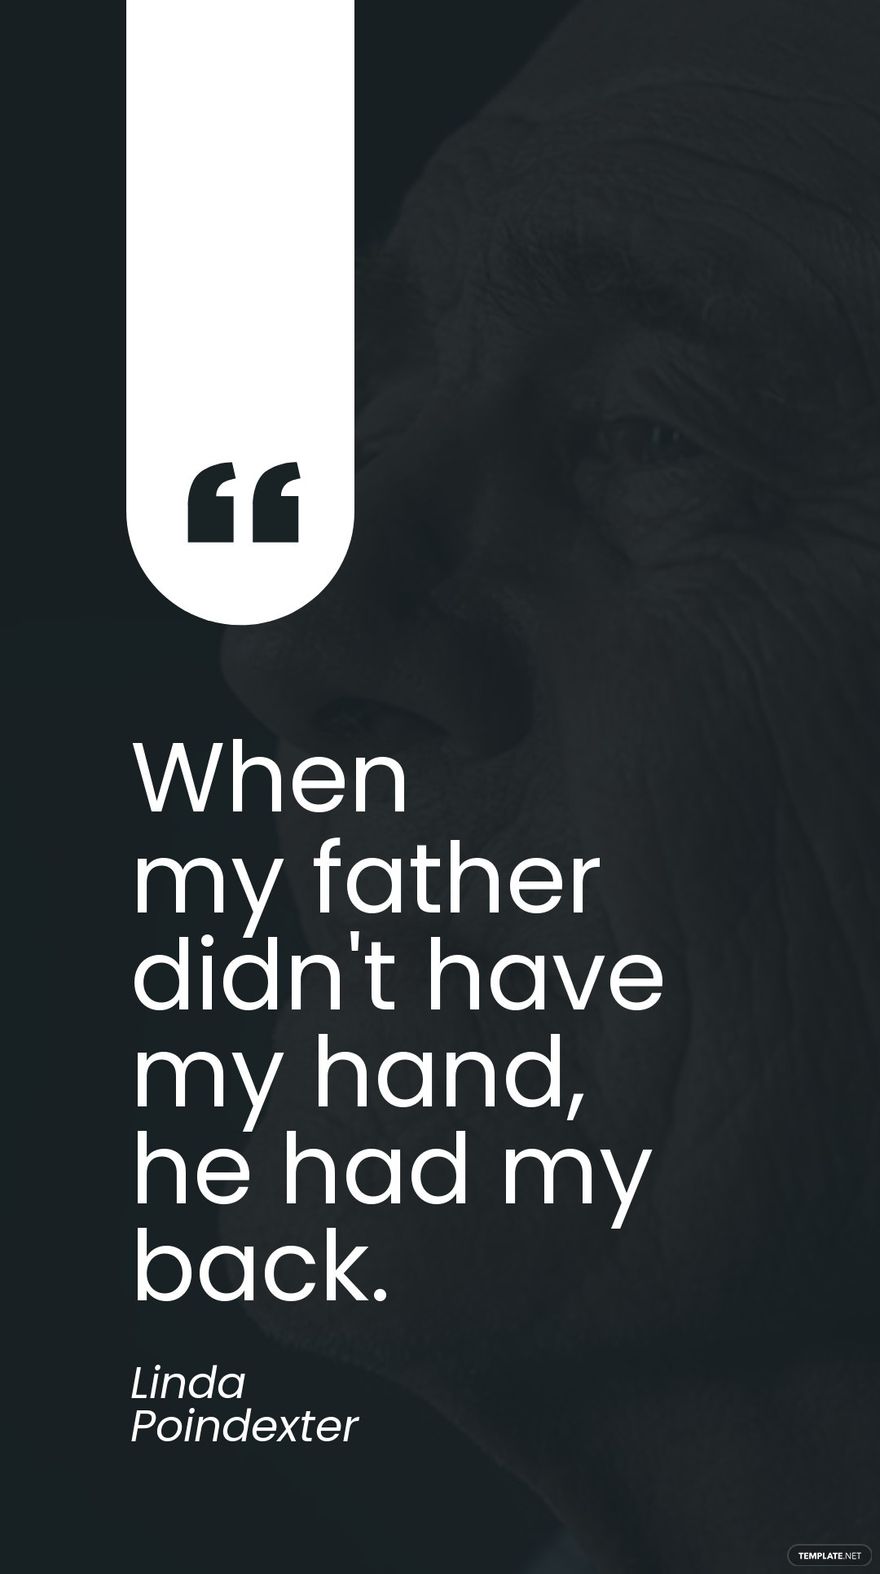 Linda Poindexter - When my father didn't have my hand, he had my back. in JPG